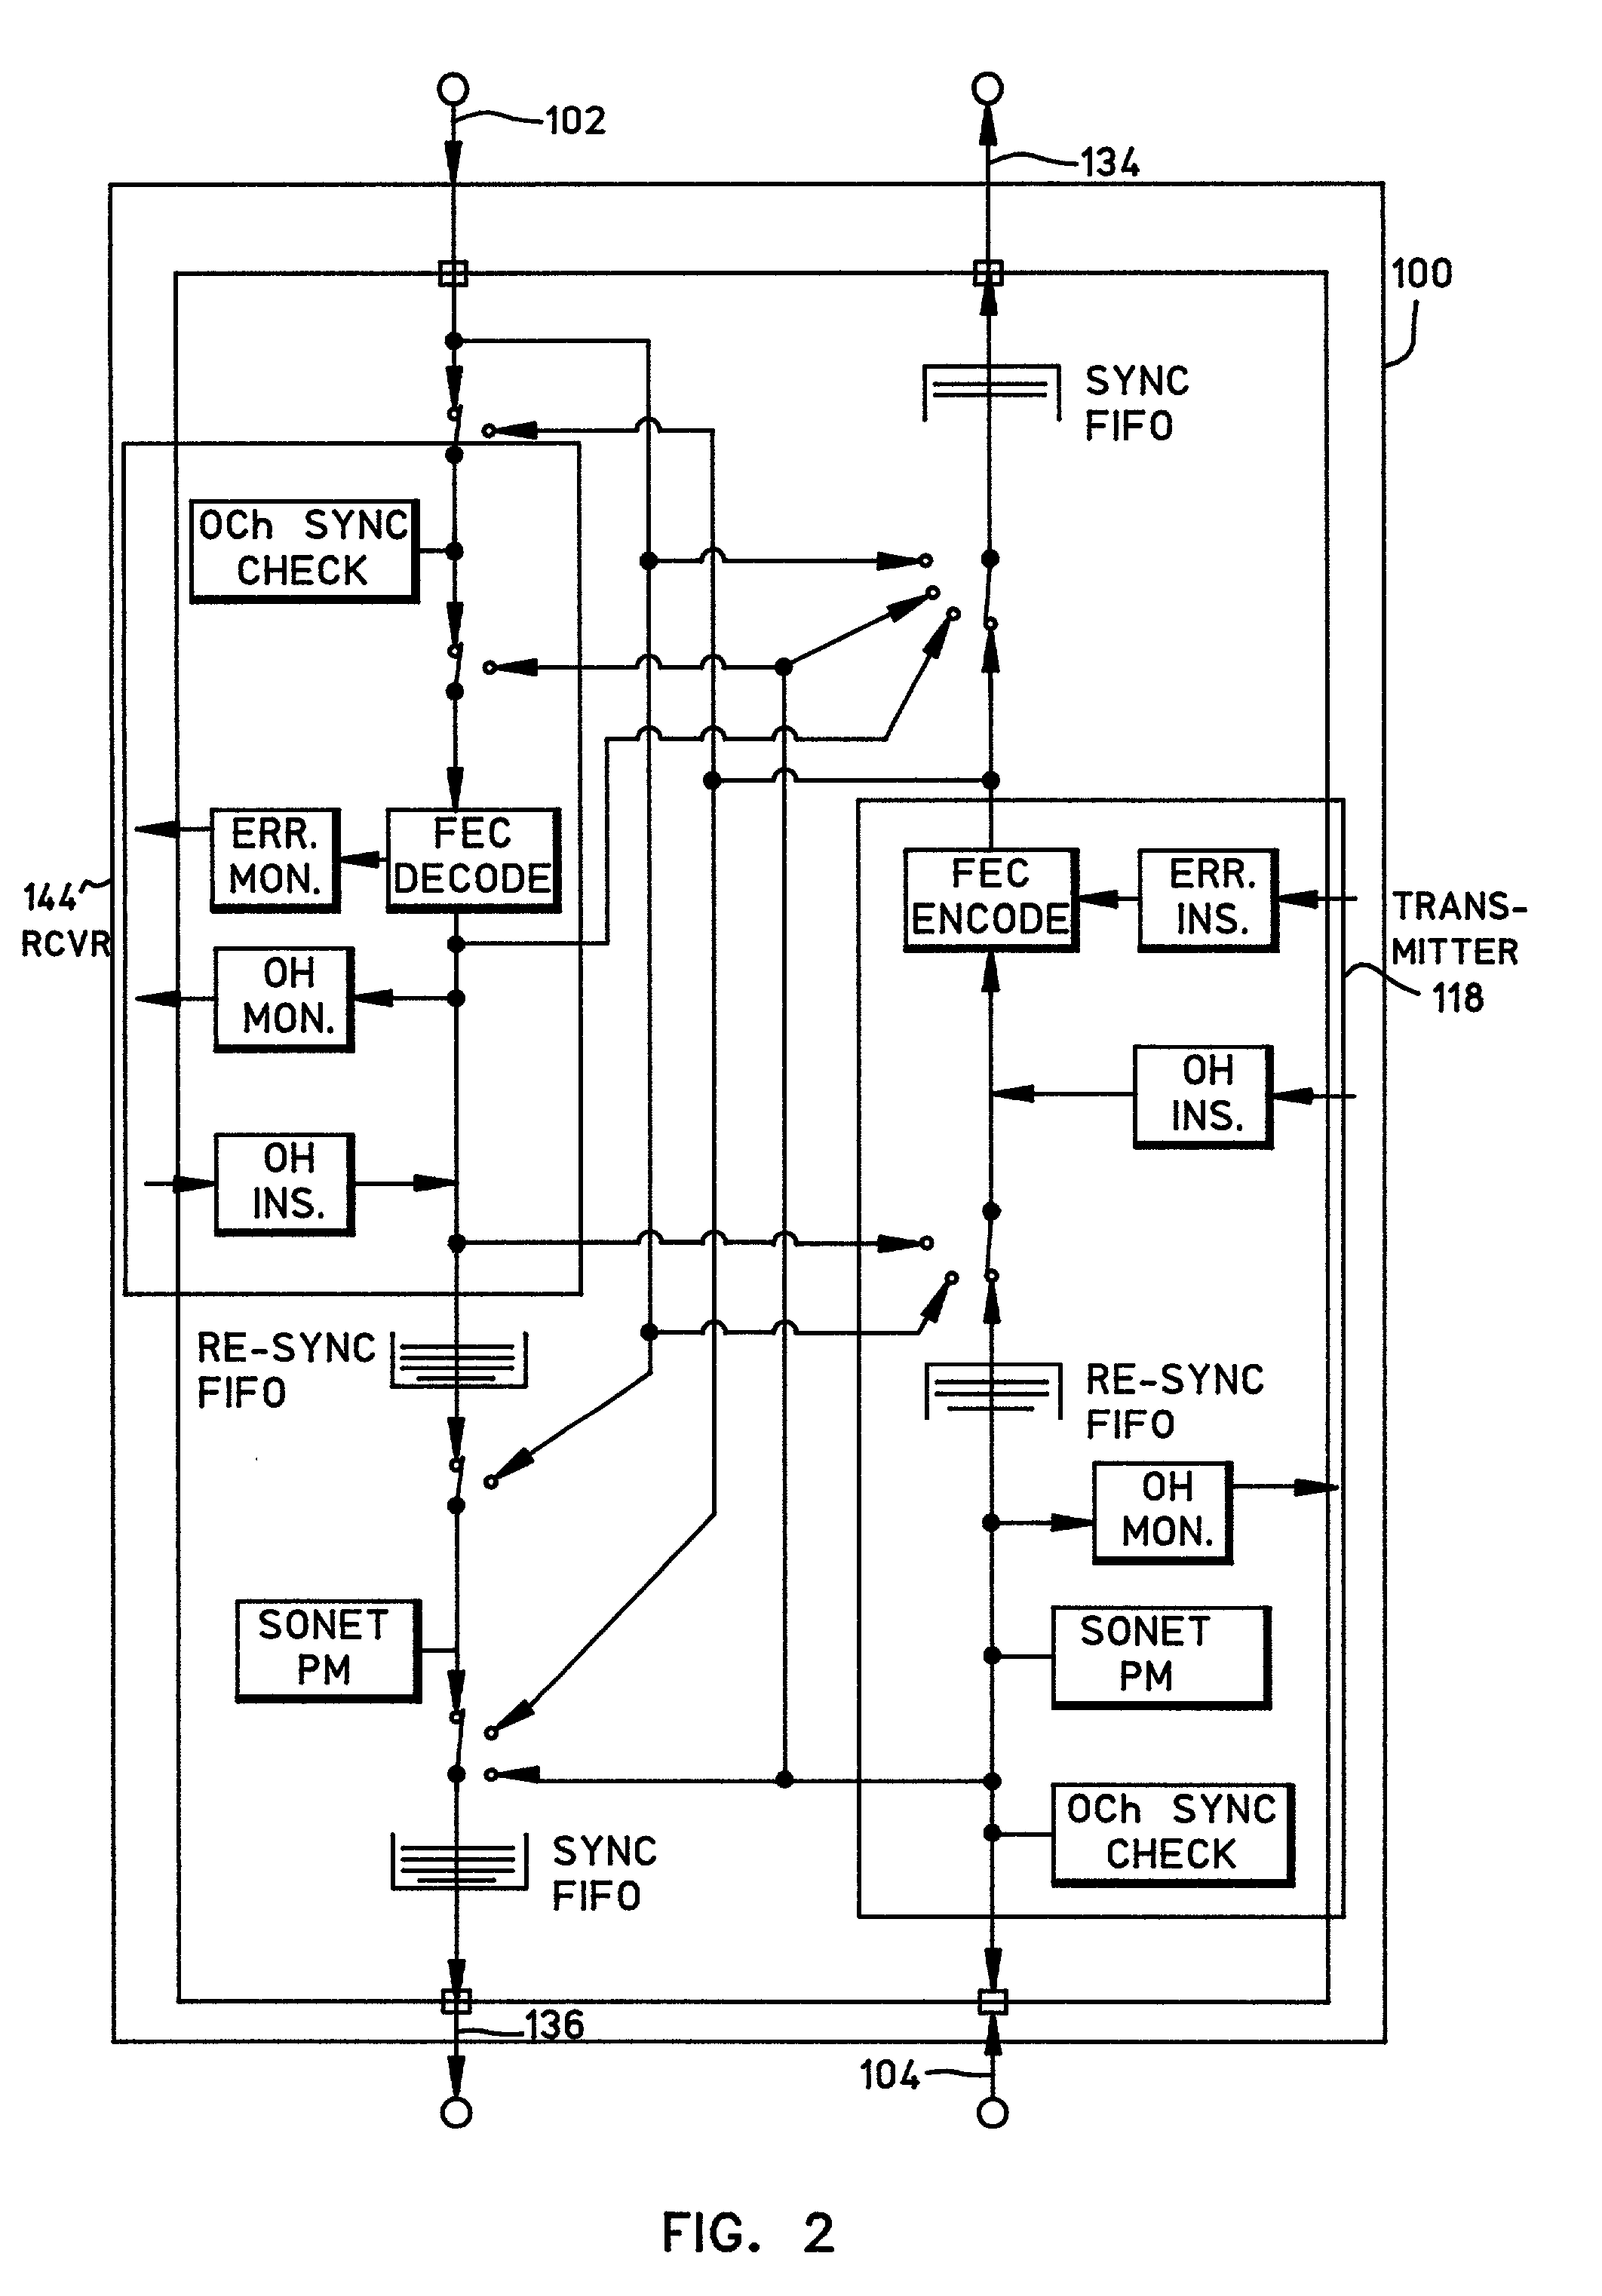 System and method for redundant path connections in digital communications network